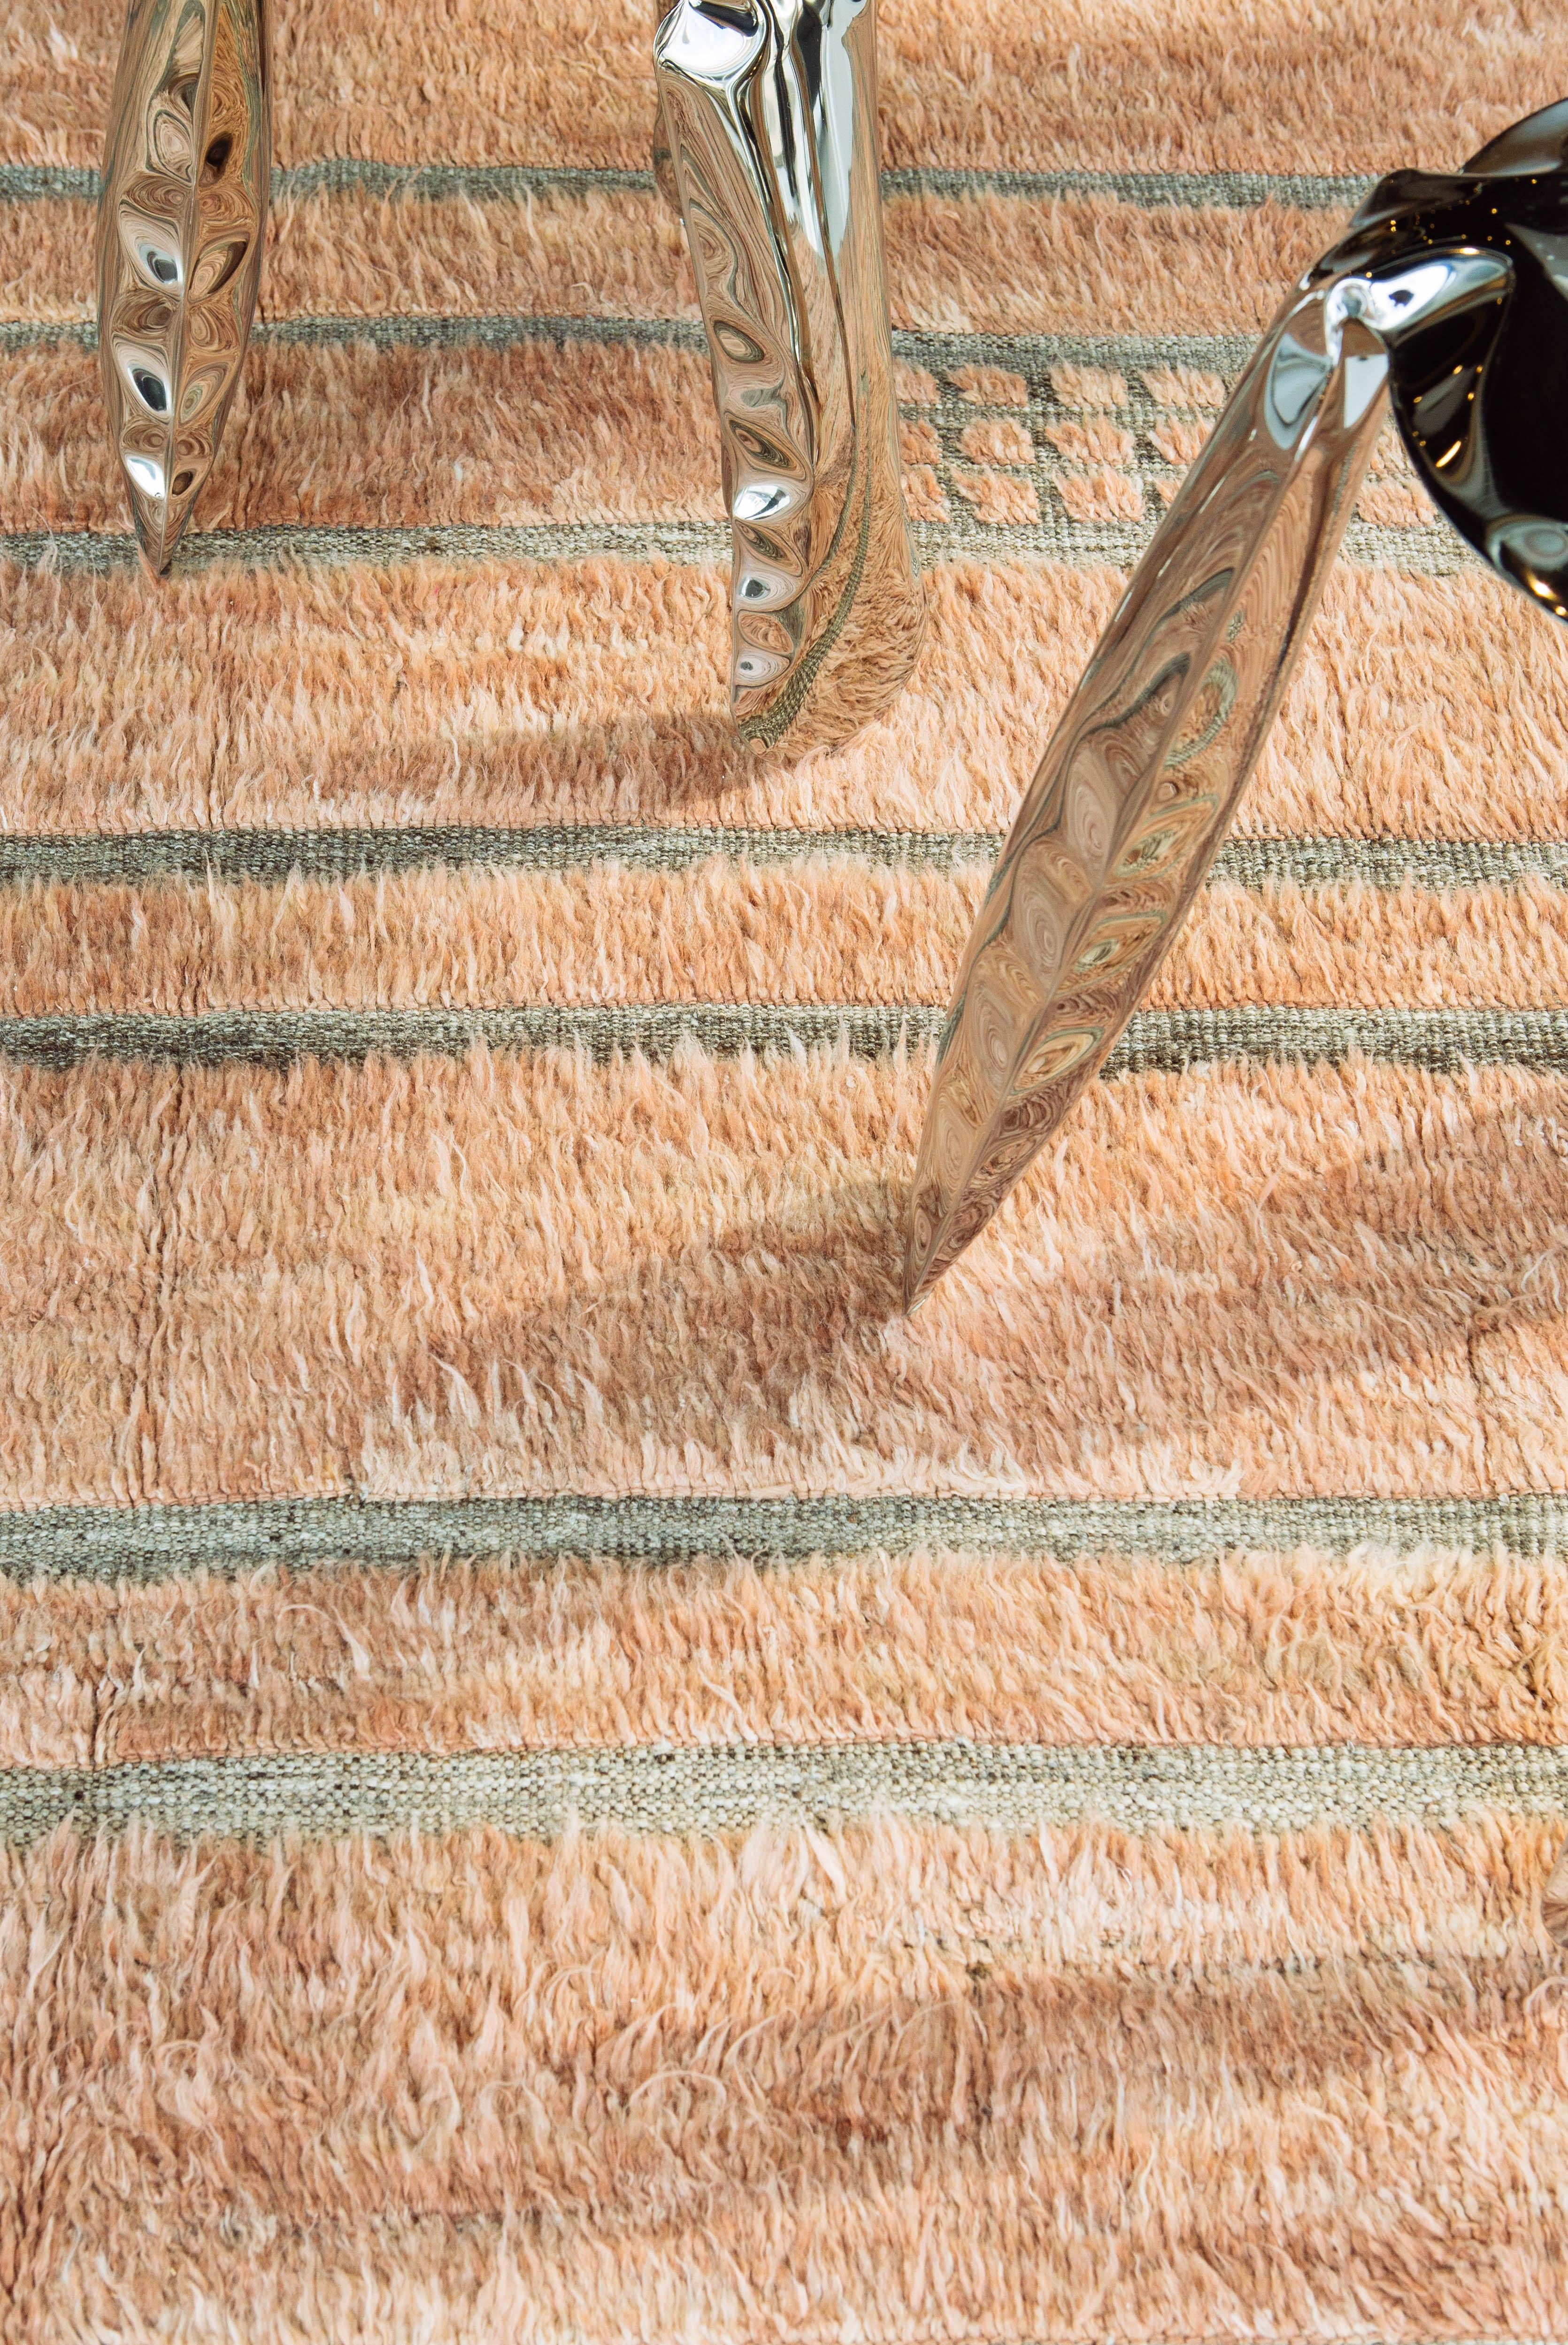 Katabatic is handwoven of salmon colored shag and a natural taupe flat-weave. Designed in Los Angeles with immense detail, Katabatic is meant to be lived on and can withstand high amounts of foot traffic. 

Rug number: 28137
Size: 9' 6